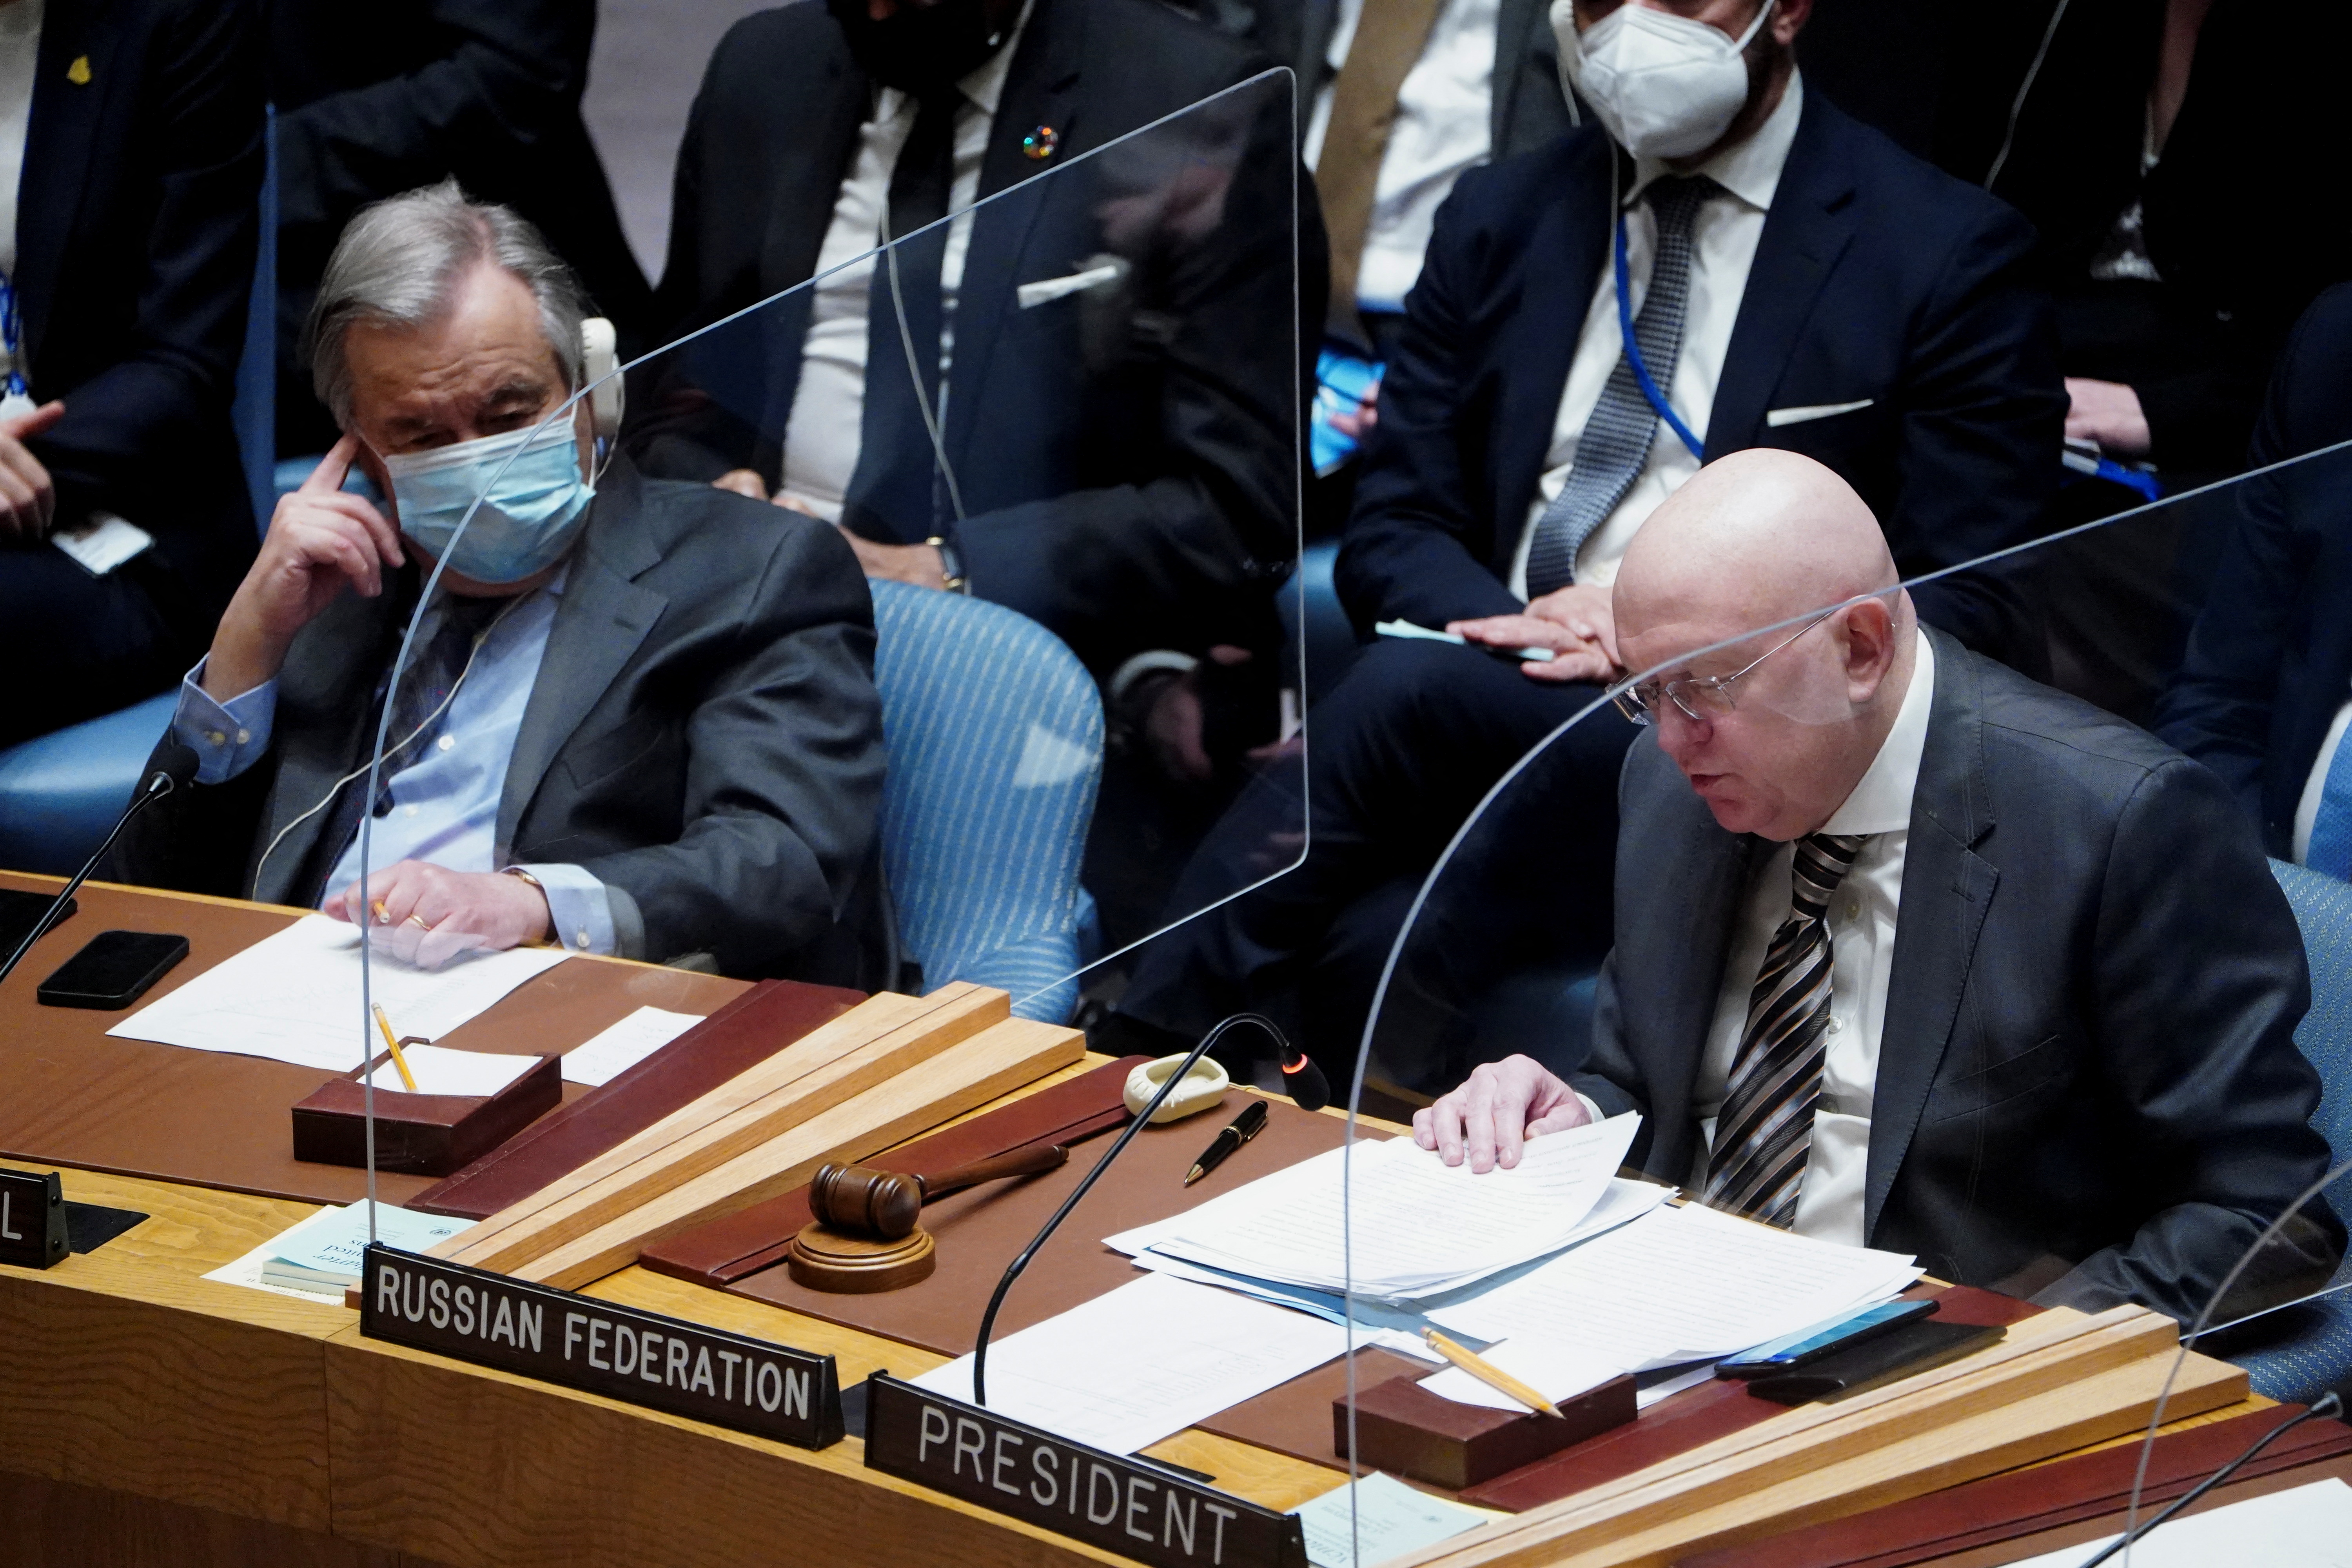 United Nations Secretary-General Antonio Guterres and Russia's Ambassador to the United Nations Vassily Nebenzia attend the United Nations Security Council meeting to discuss the ongoing crisis in Ukraine with Russia, in New York City, U.S., February 23, 2022. REUTERS/Carlo Allegri